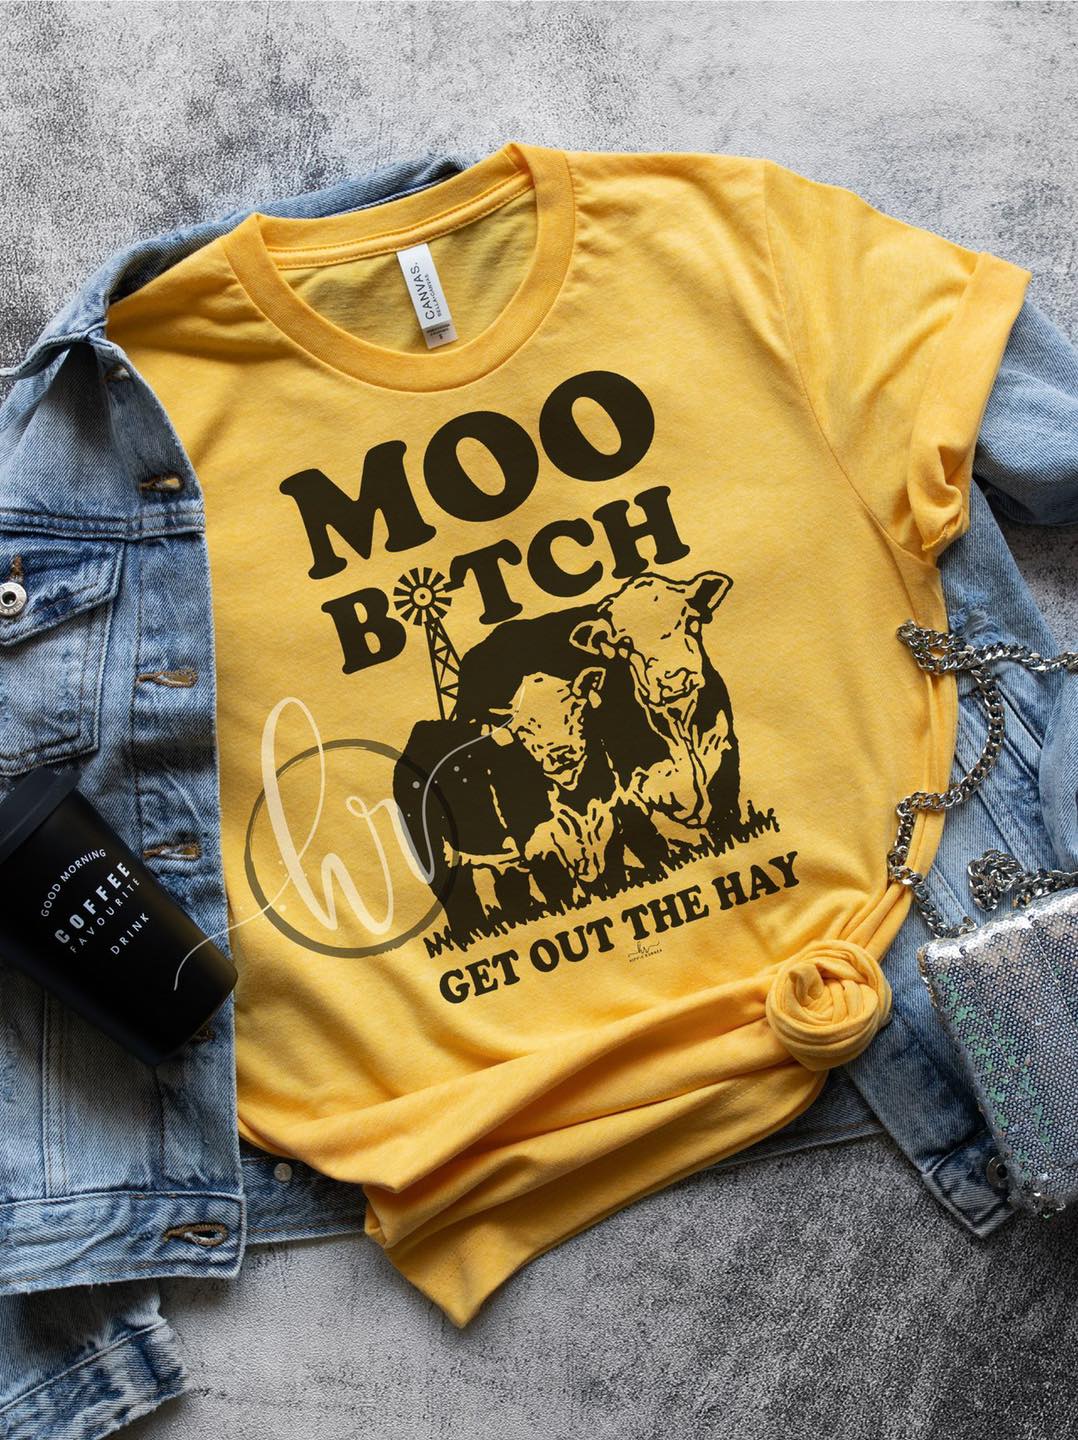 Moo bitch get out the hay - Cow moo and the hay Shirt, Hoodie ...